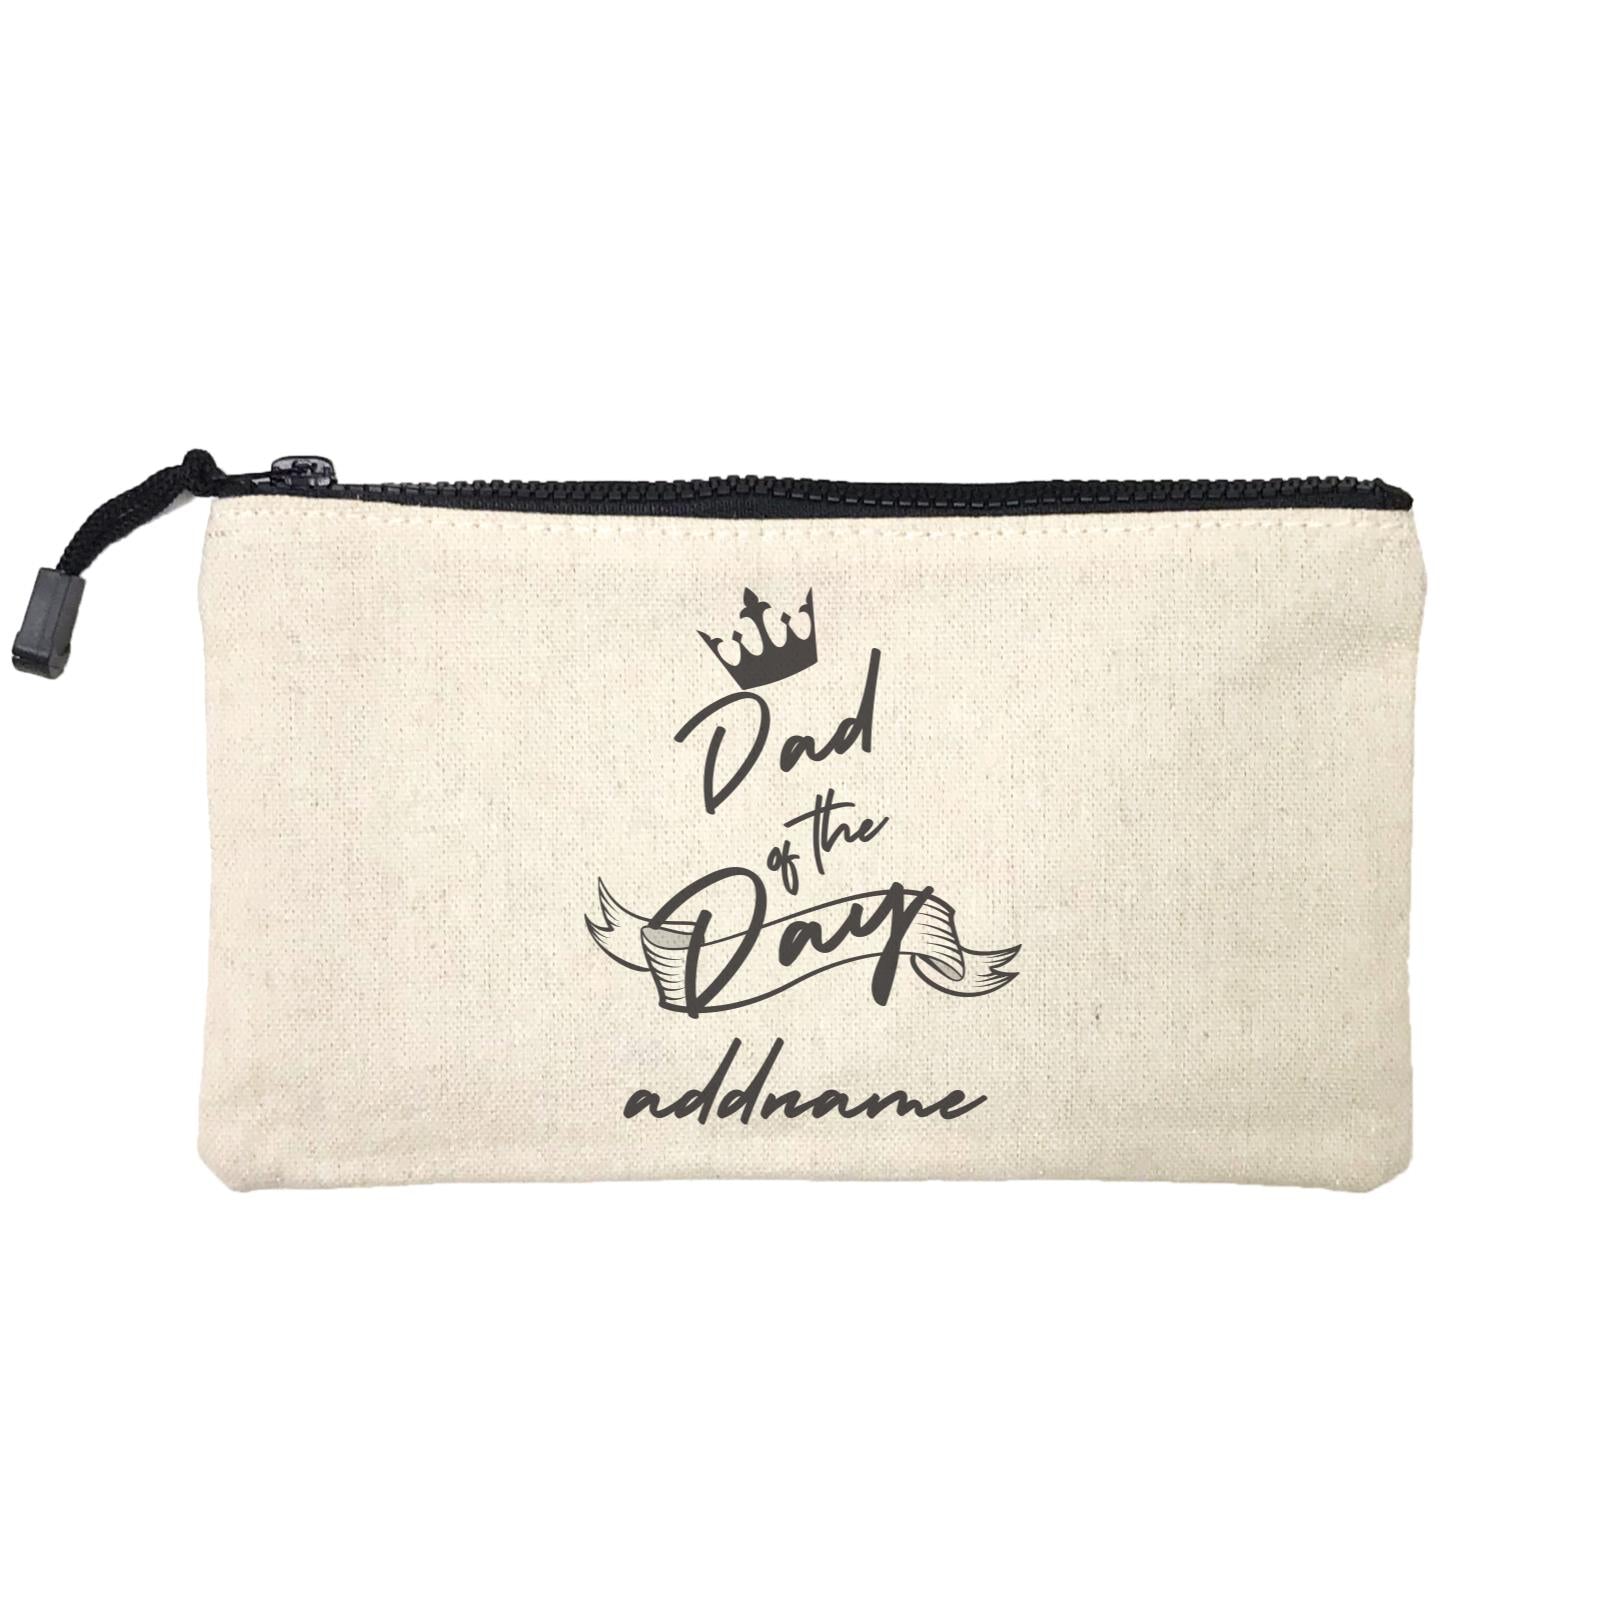 Birthday Typography Dad Of The Day Addname Mini Accessories Stationery Pouch